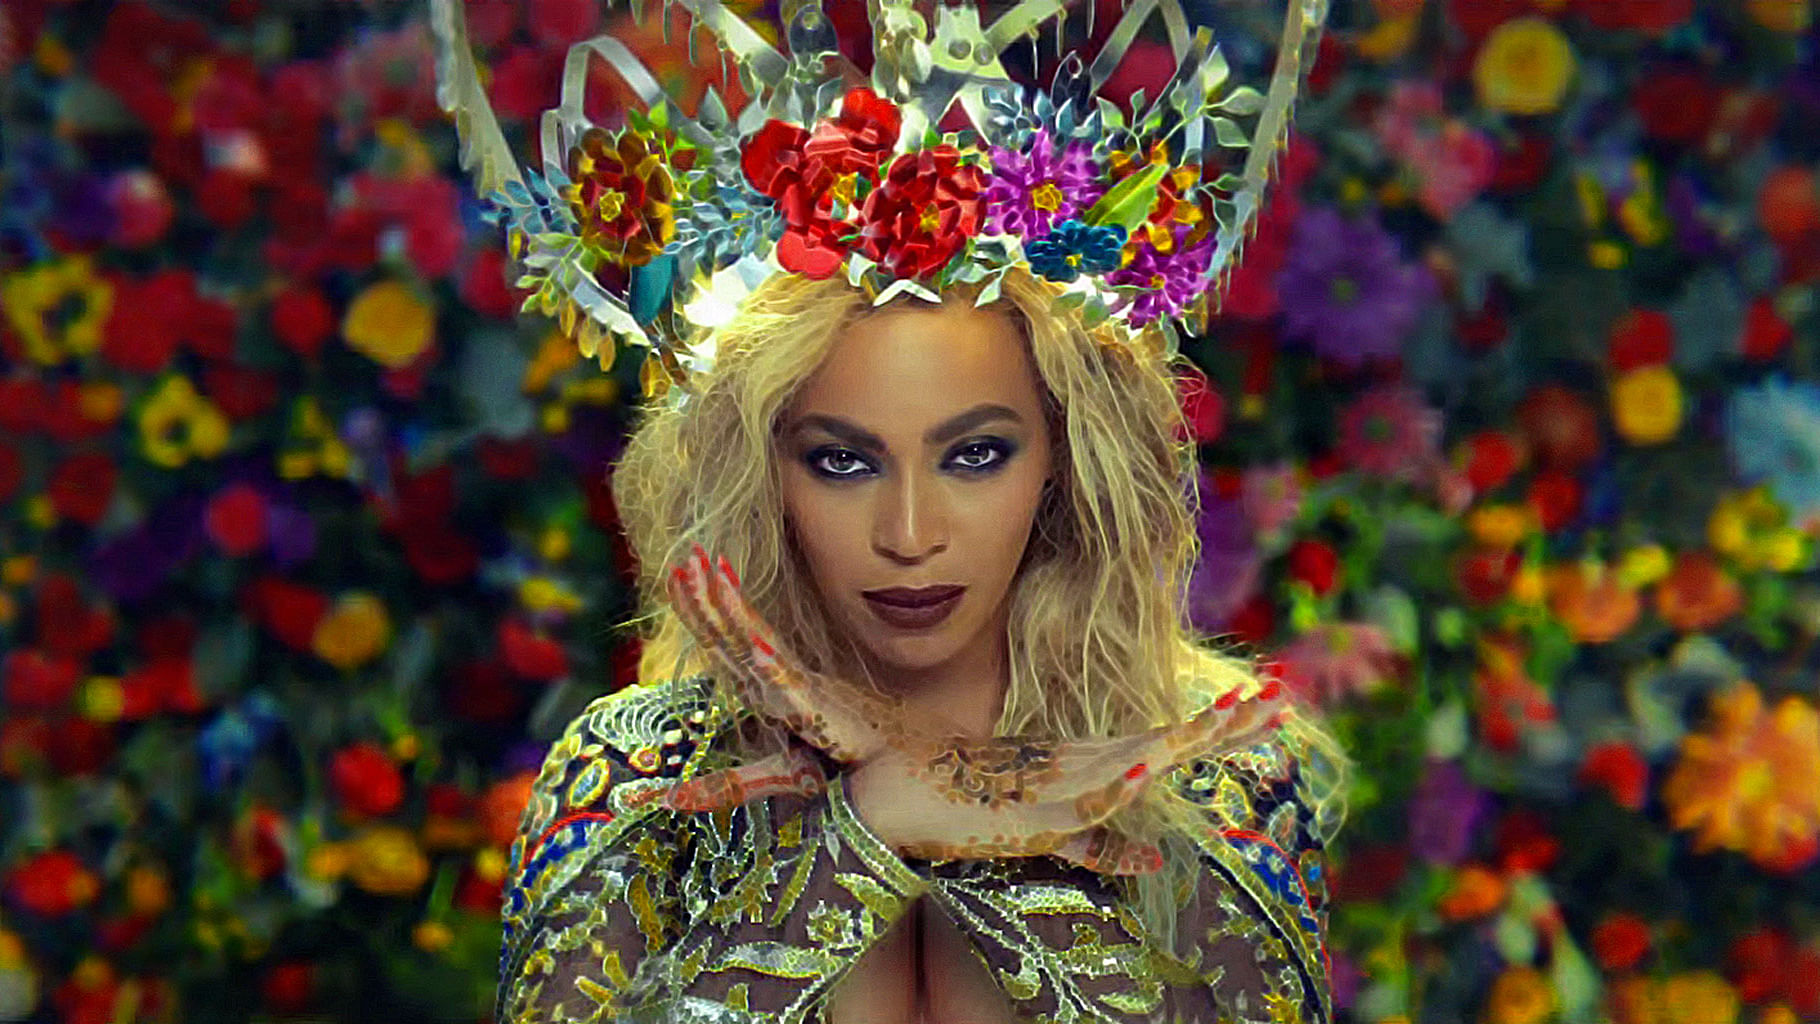 Beyonce welcomes twins. (Photo: Youtube/<a href="https://www.youtube.com/channel/UCDPM_n1atn2ijUwHd0NNRQw">Coldplay Official</a>)